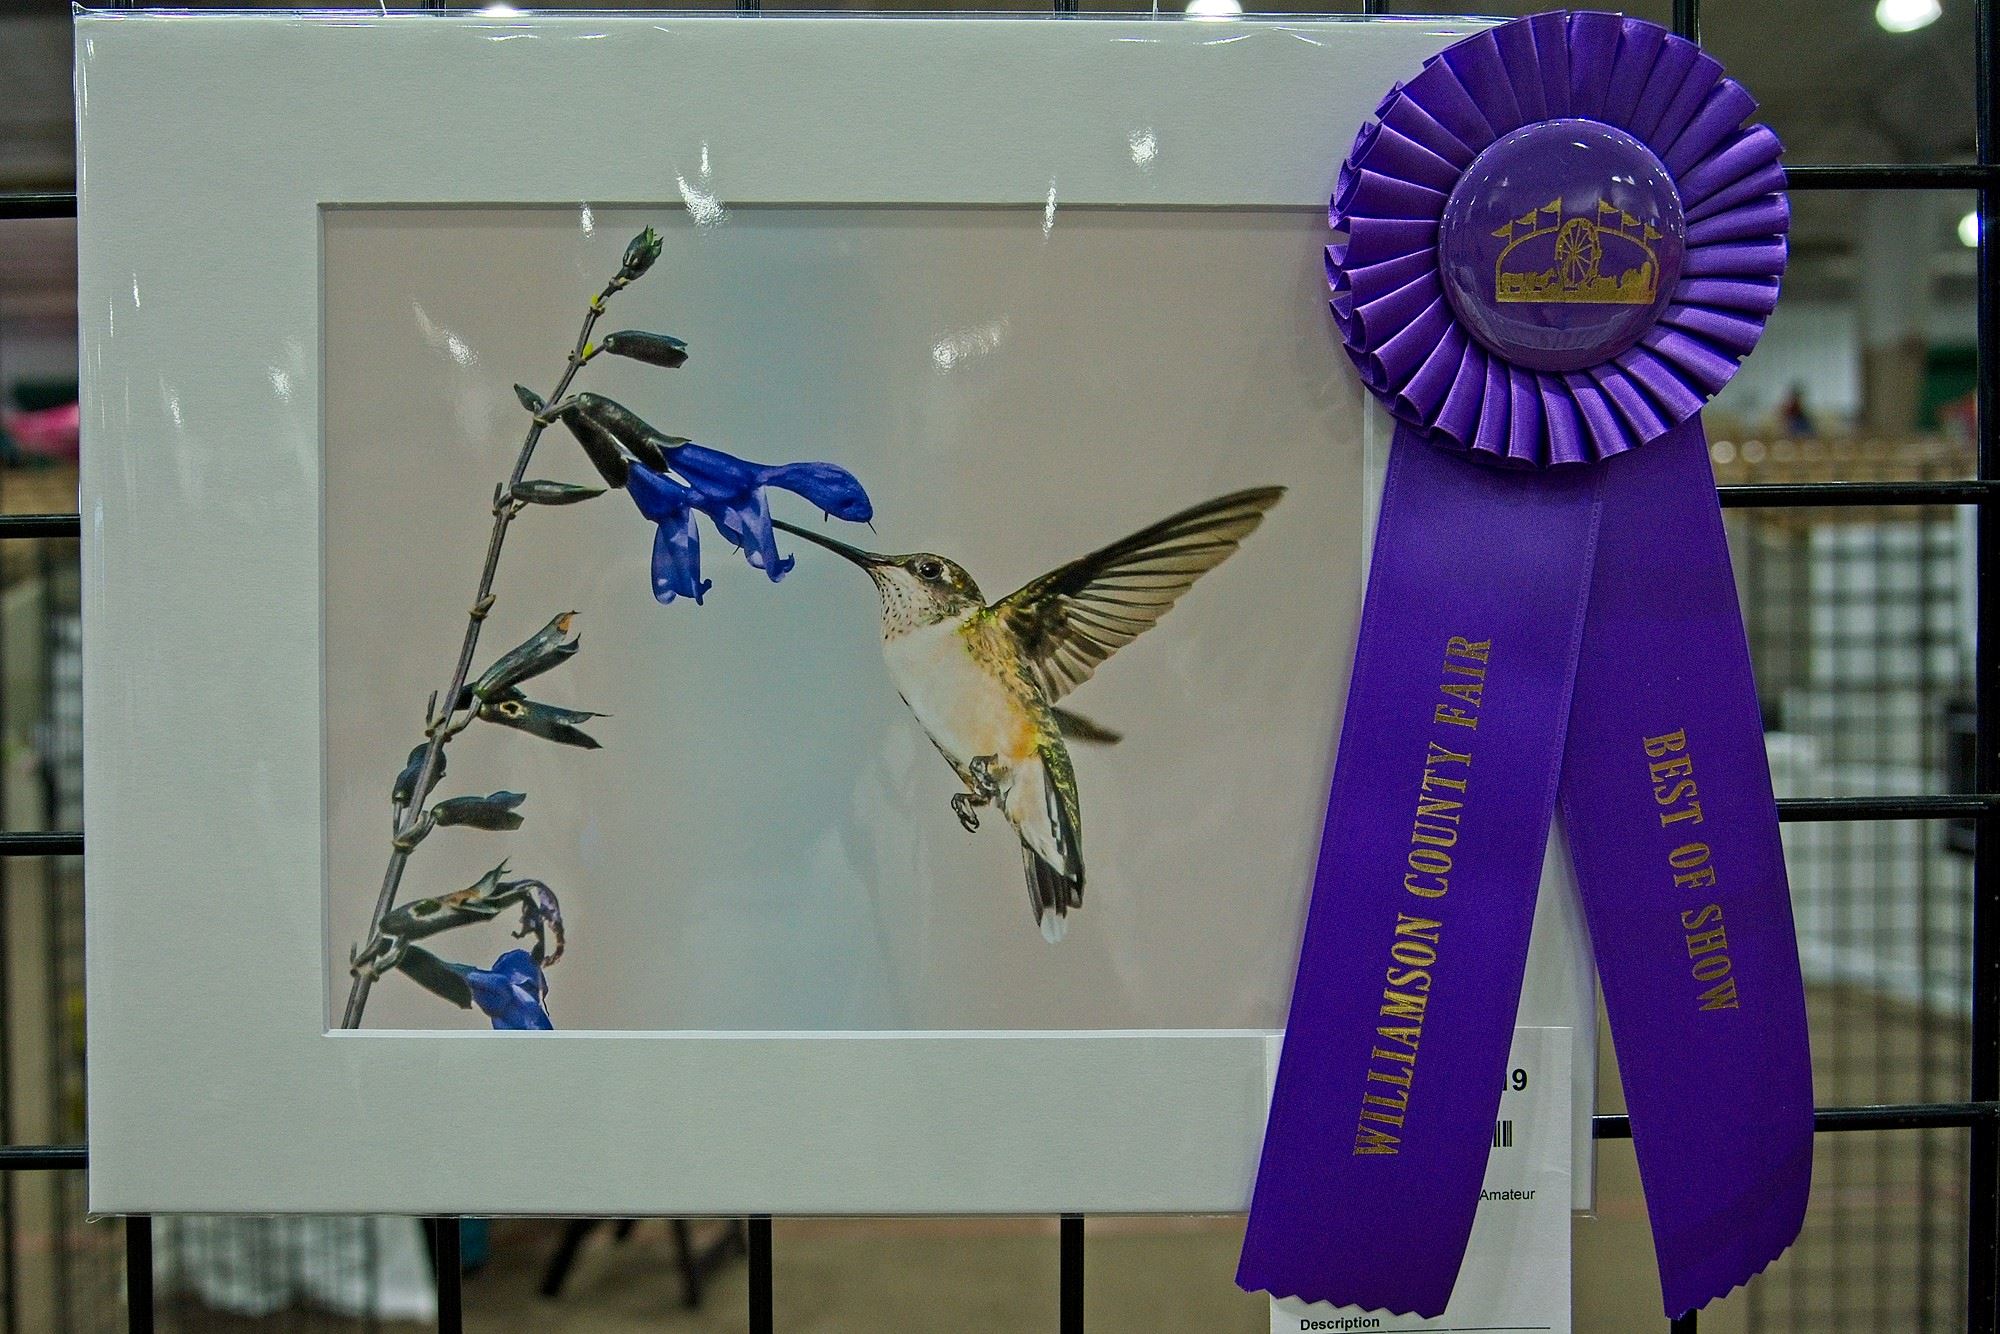 Best of Show photograph of a hummingbird with link to enter Cultural Arts divisions.